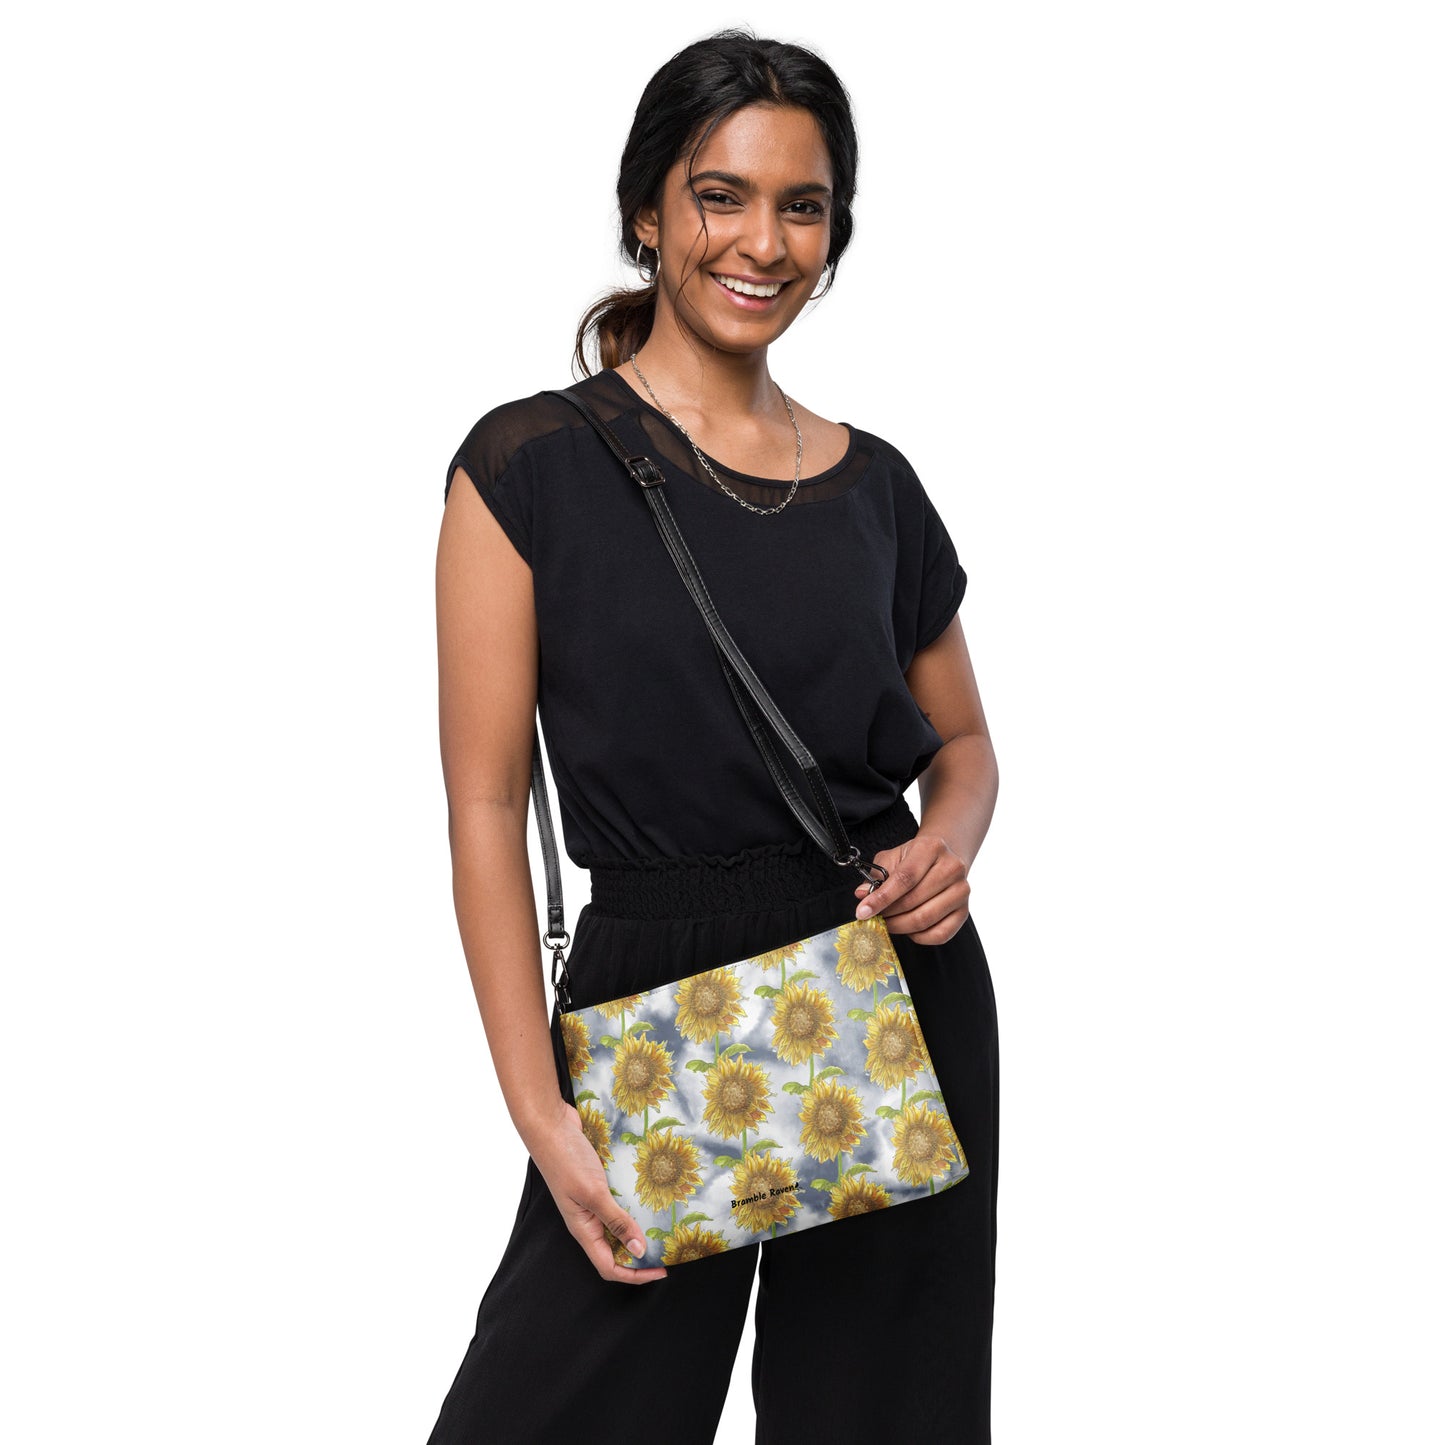 Sunflower crossbody bag. Faux leather with polyester lining and dark grey hardware. Comes with adjustable removable wrist and shoulder straps. Features patterned design of watercolor sunflowers against a cloudy background. Shown on shoulder of female model.